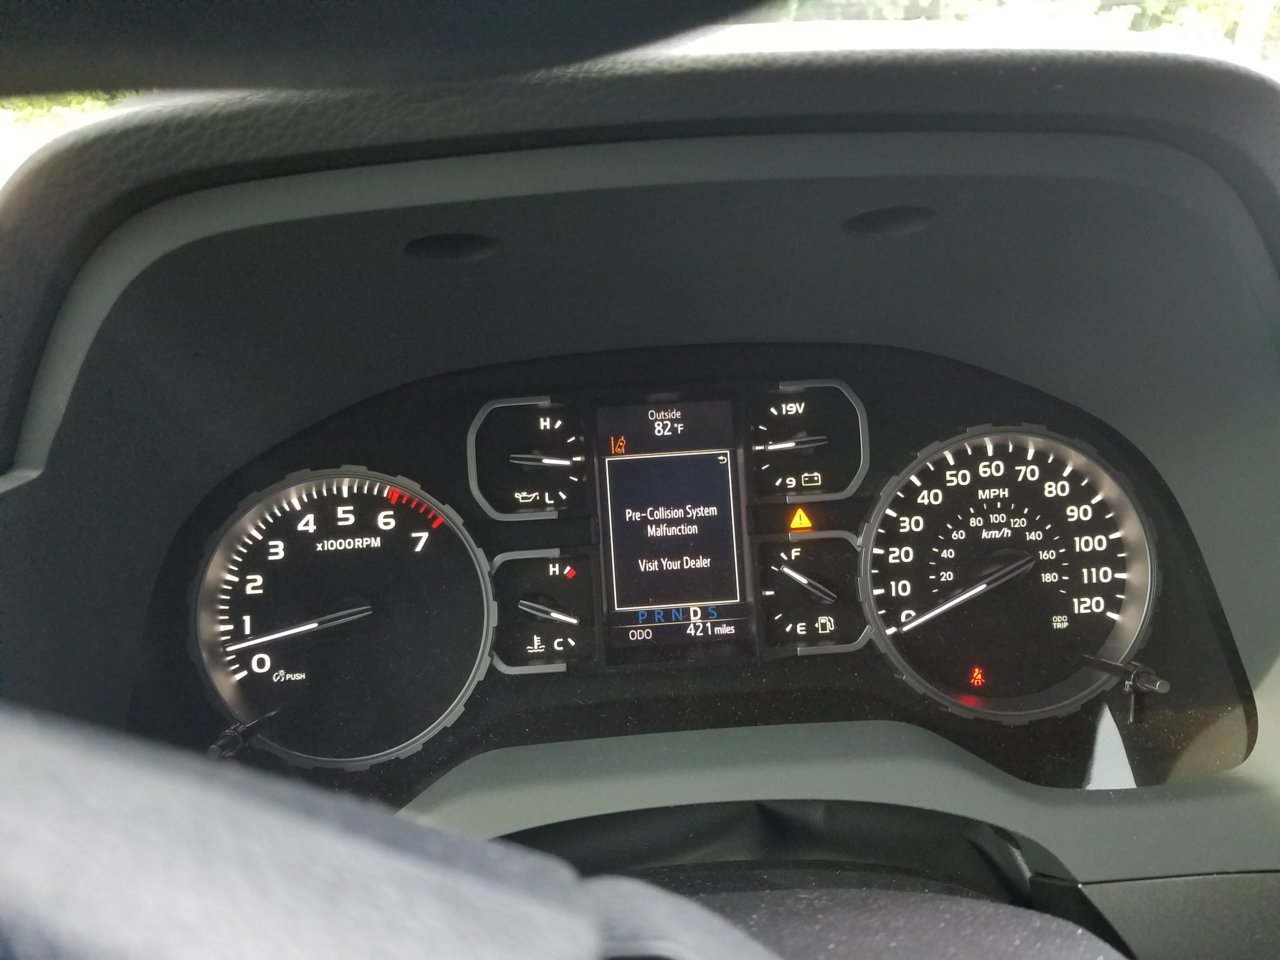 TSS/Pre Collision System Malfunction.... | Toyota Tundra Forum 2018 Toyota Camry Pre Collision System Malfunction